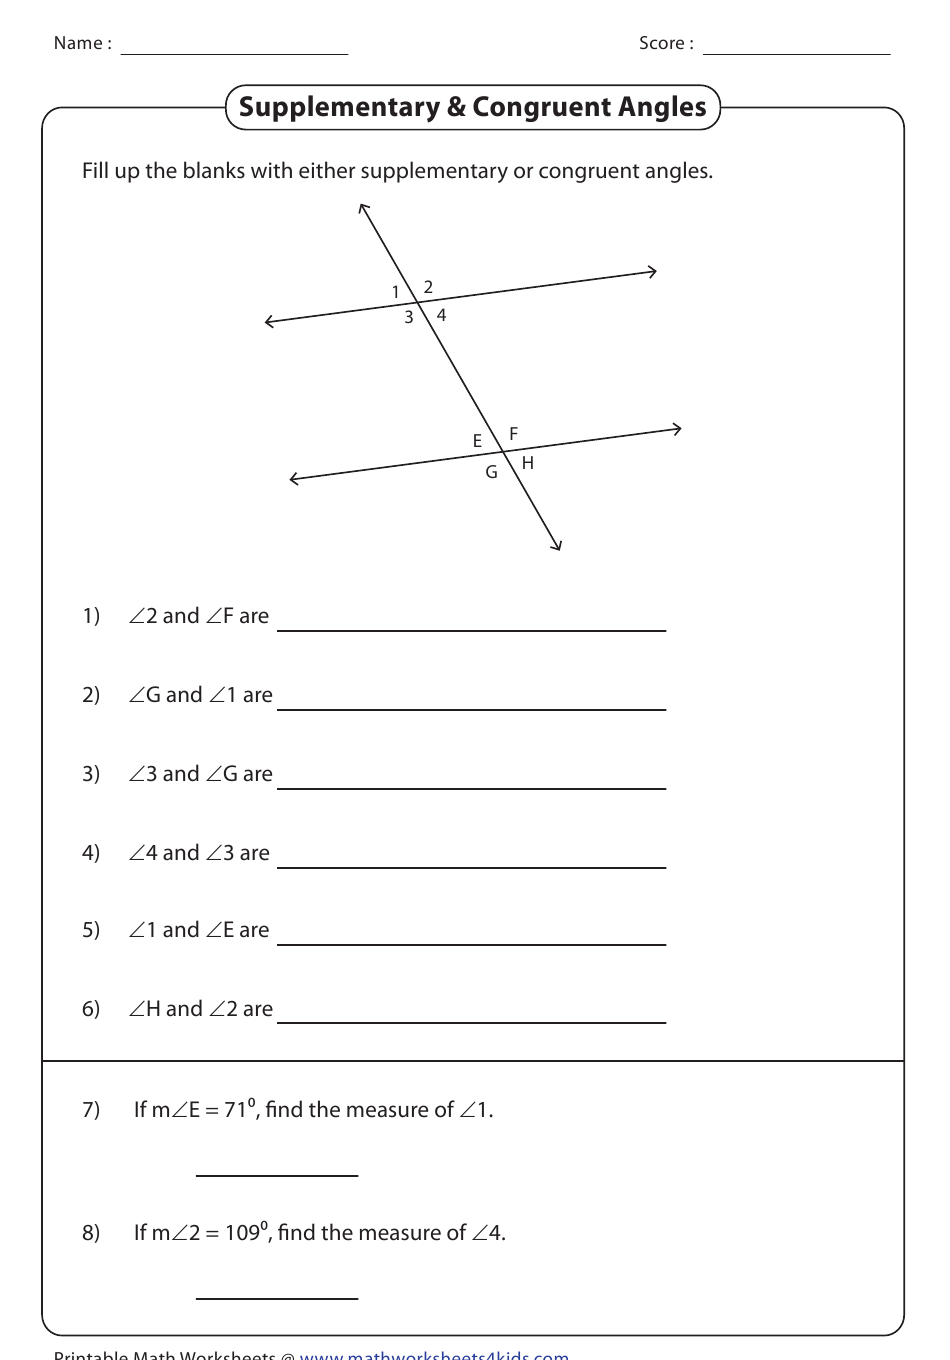 Supplementary Congruent Angles Worksheet With Answer Key Download